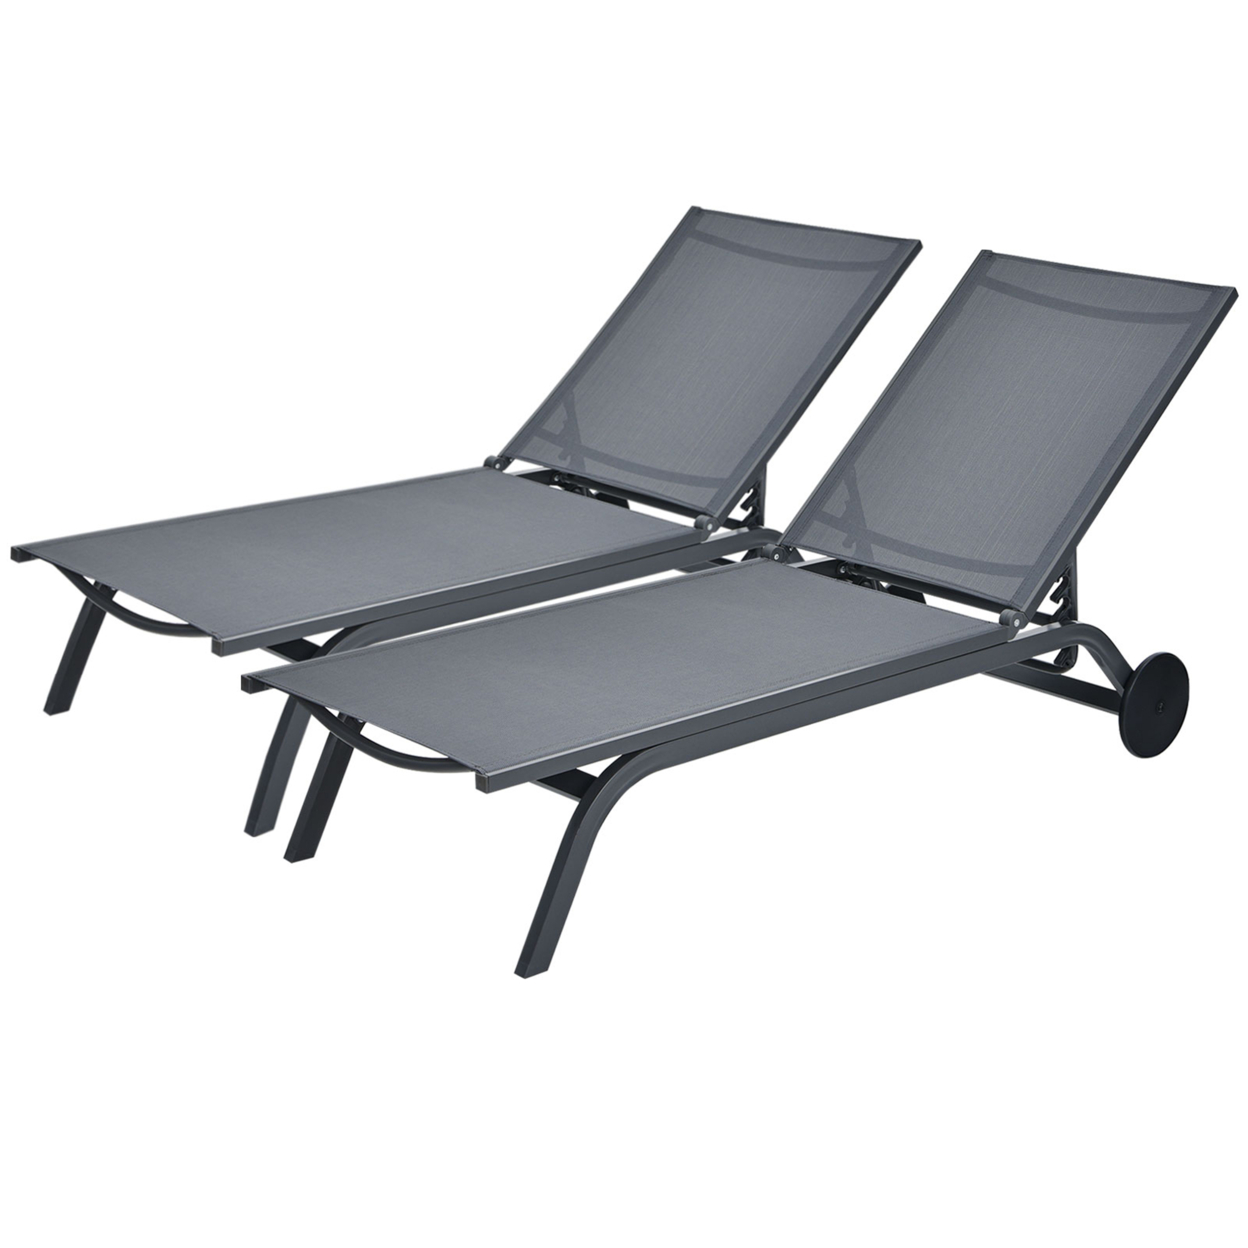 Set Of 2 Patio Chaise Lounge Chair Aluminum Adjustable Recliner W/ Wheels Grey